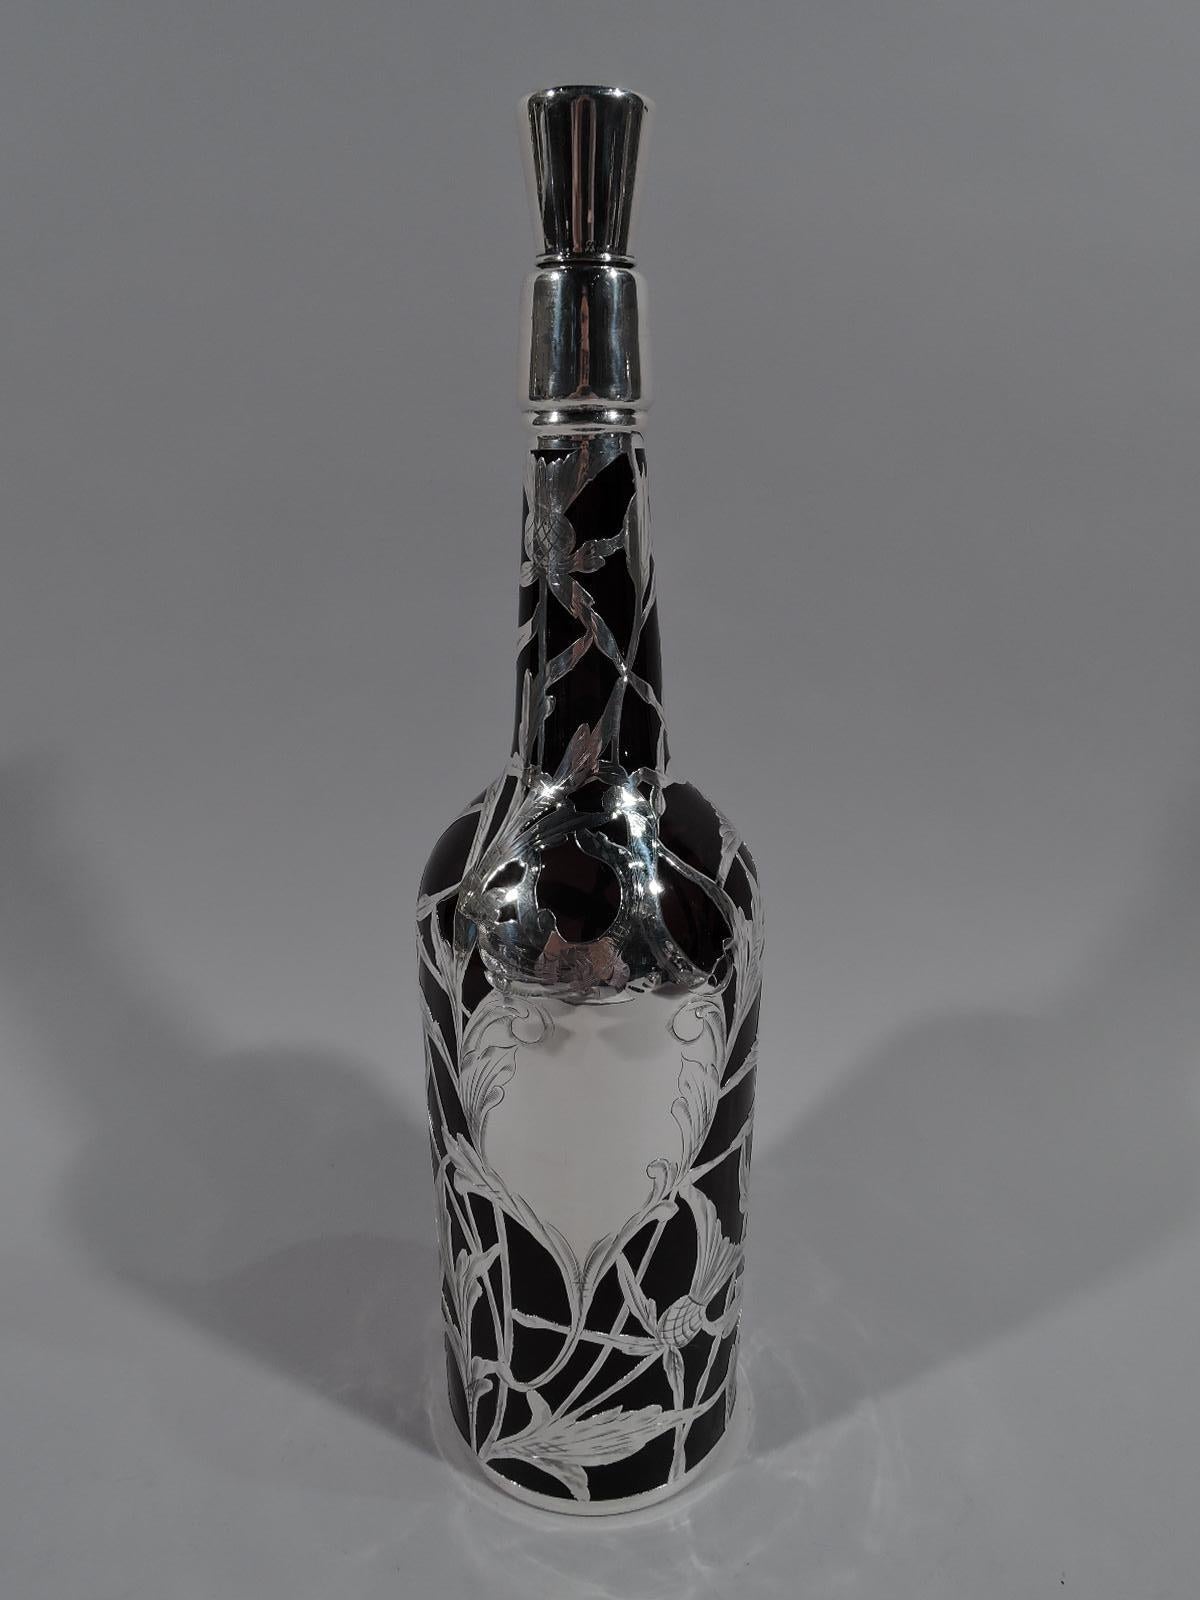 Turn-of-the-century Art Nouveau amber glass bottle decanter with engraved silver overlay. Made by La Pierre in New York. Traditional cylindrical form with sloping shoulder and upward tapering neck. Open and interlaced silver overlay with thistle